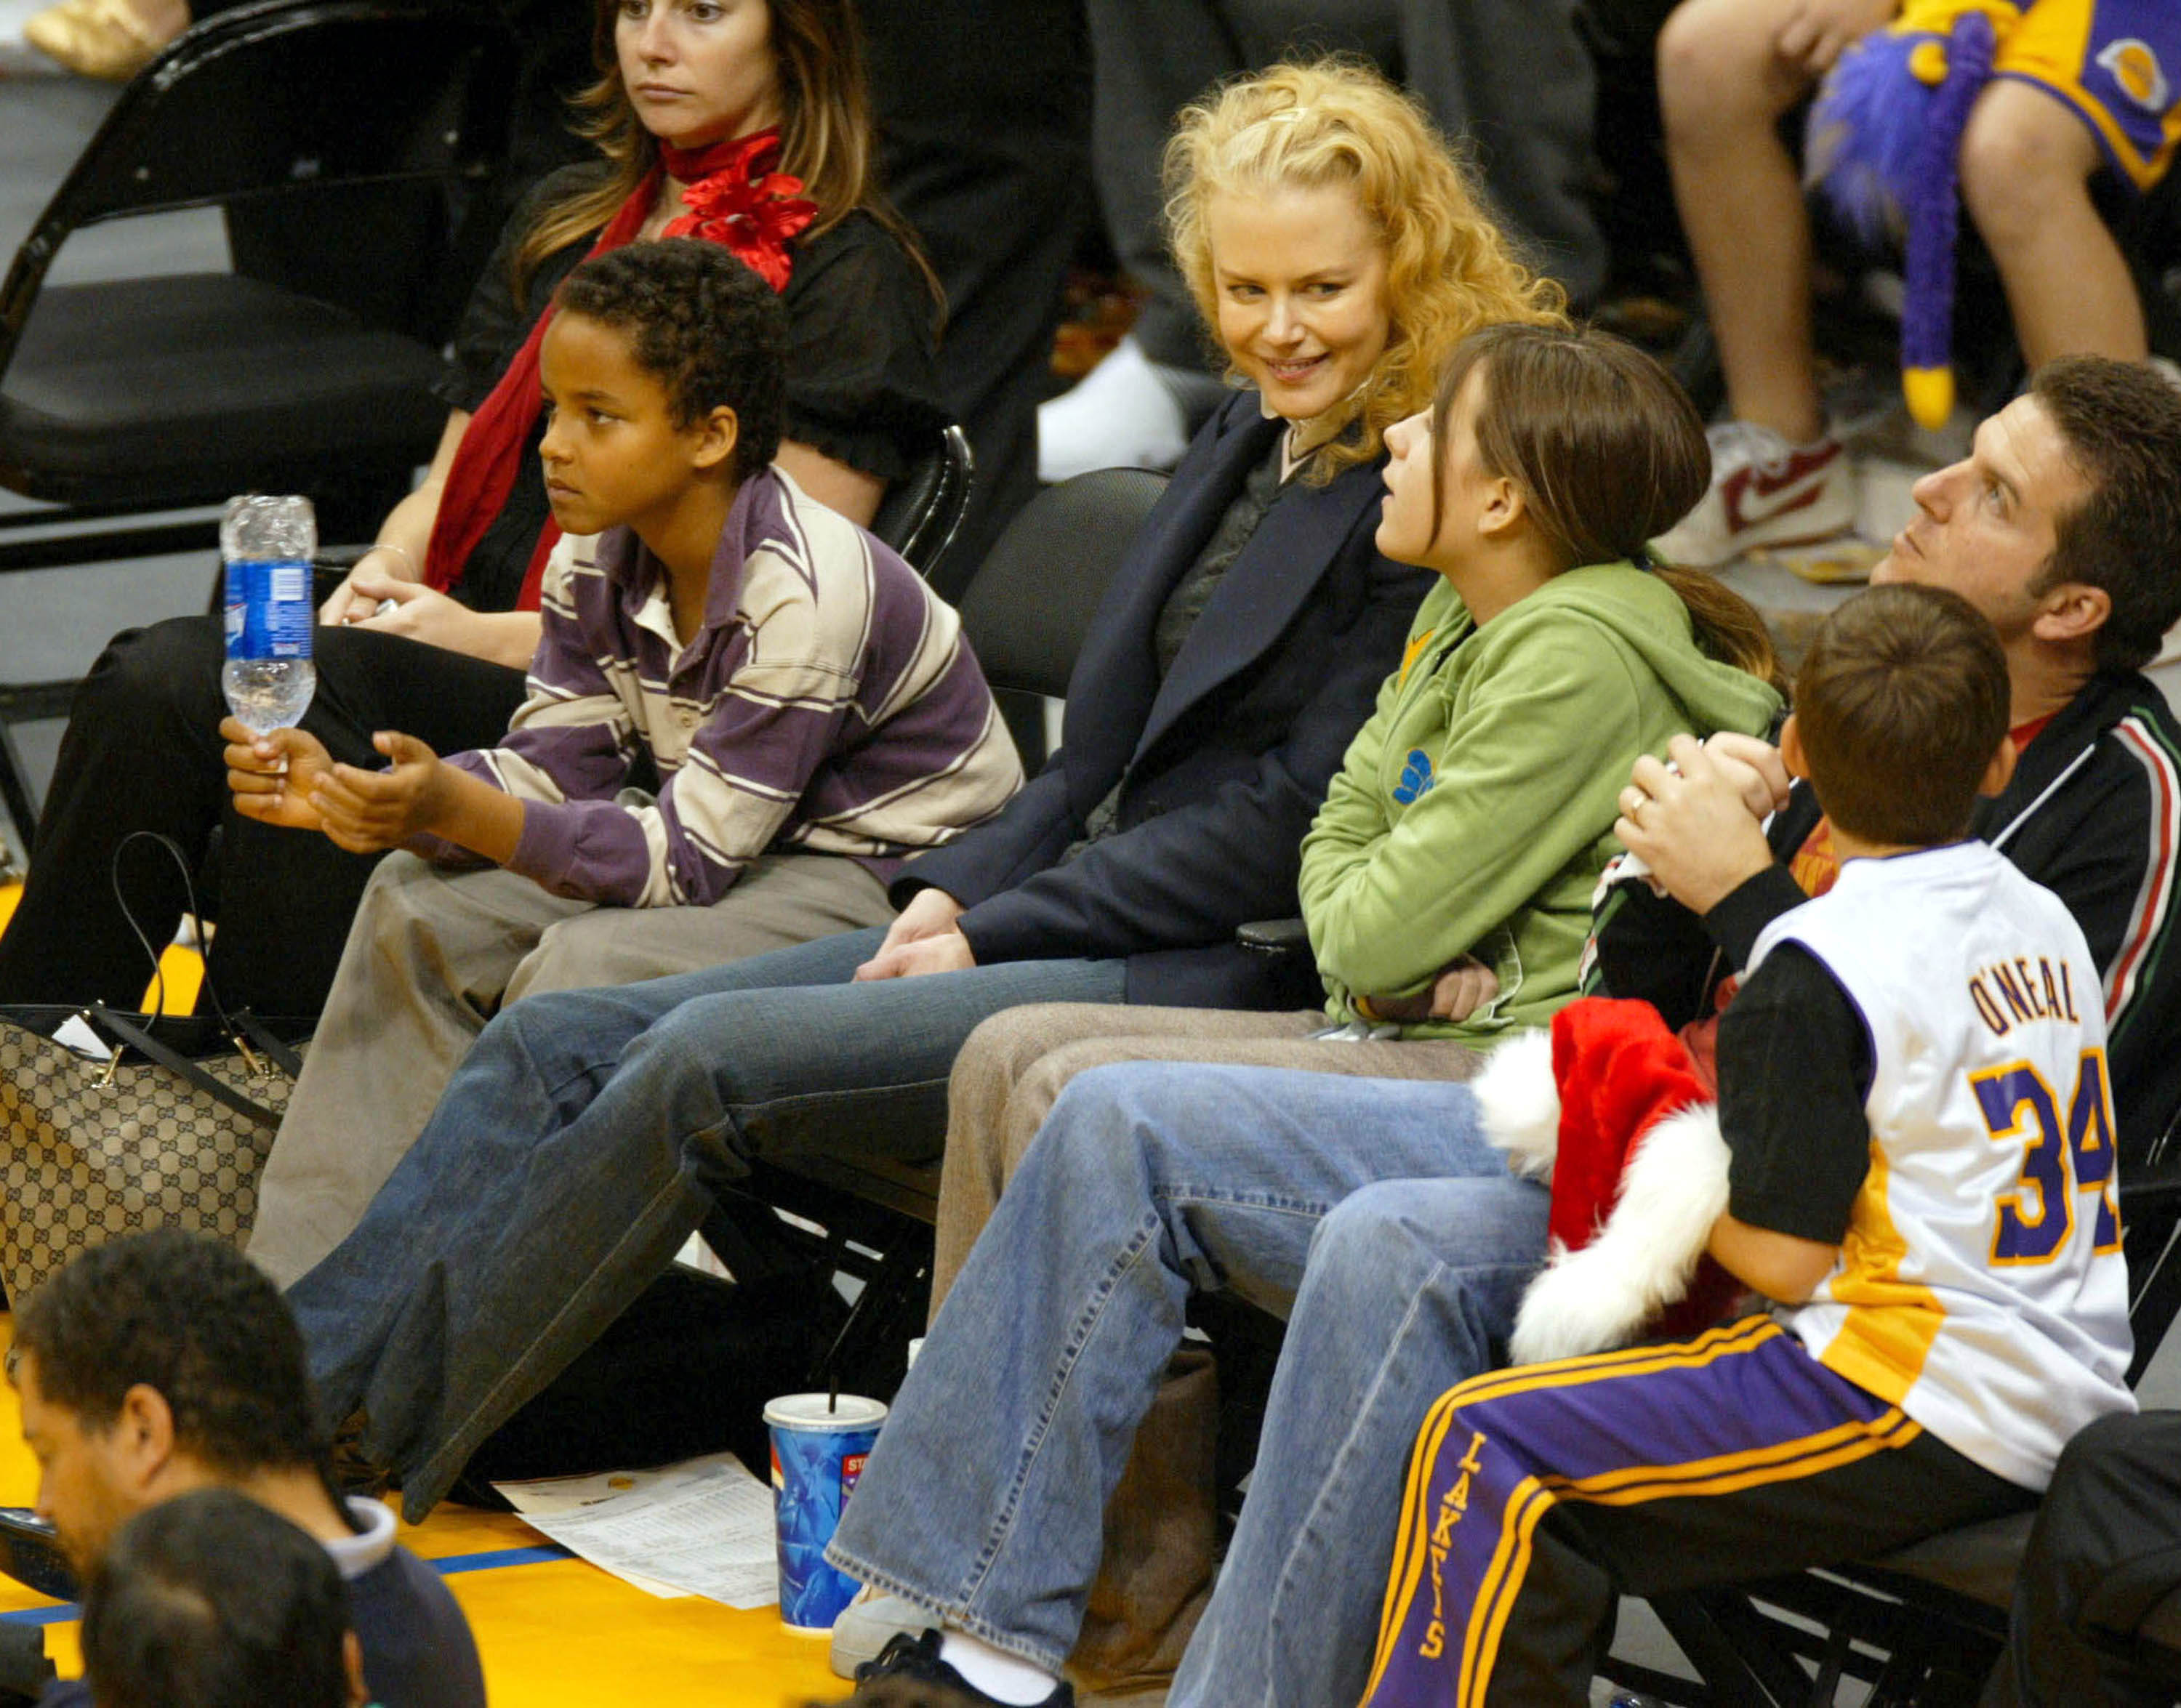 Nicole Kidman and her children Connor and Isabella Kidman Cruise at a basketball game on December 25, 2004, in Los Angeles, California | Source: Getty Images